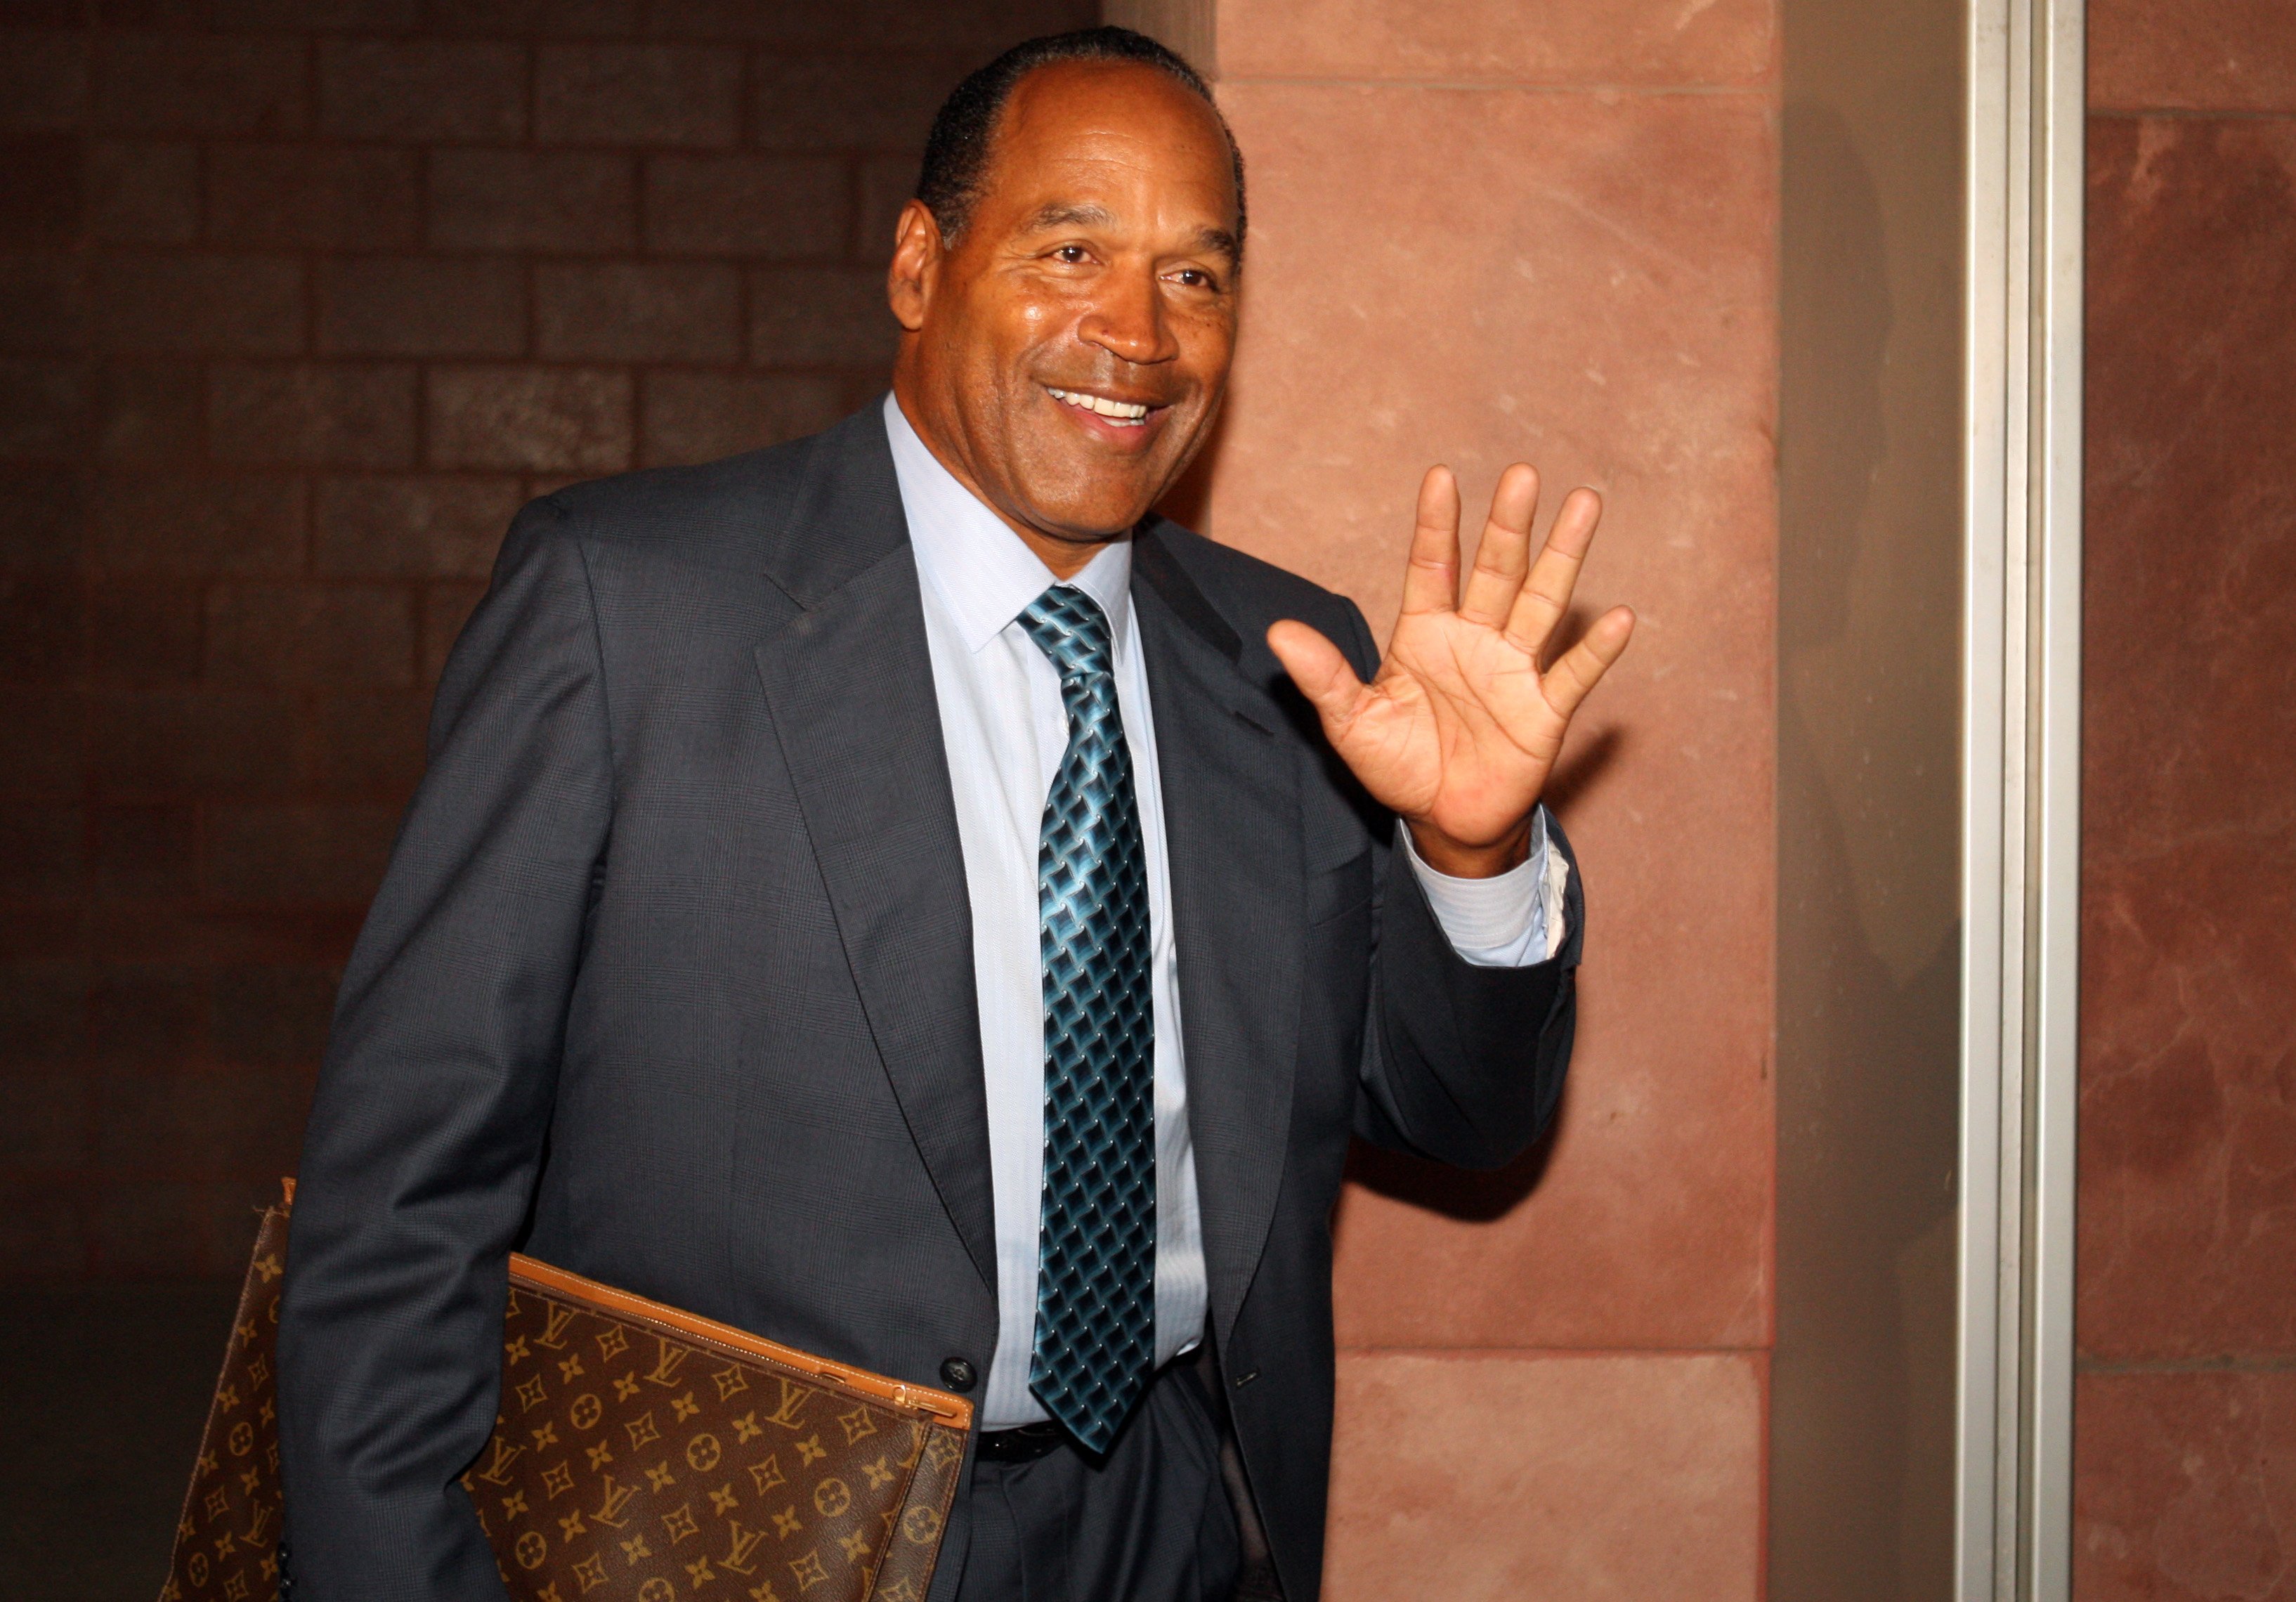 OJ Simpson waves at the press as he leaves the court after the closing arguments during his 2008 trial for felony kidnapping and armed robbery. | Photo: Getty Images